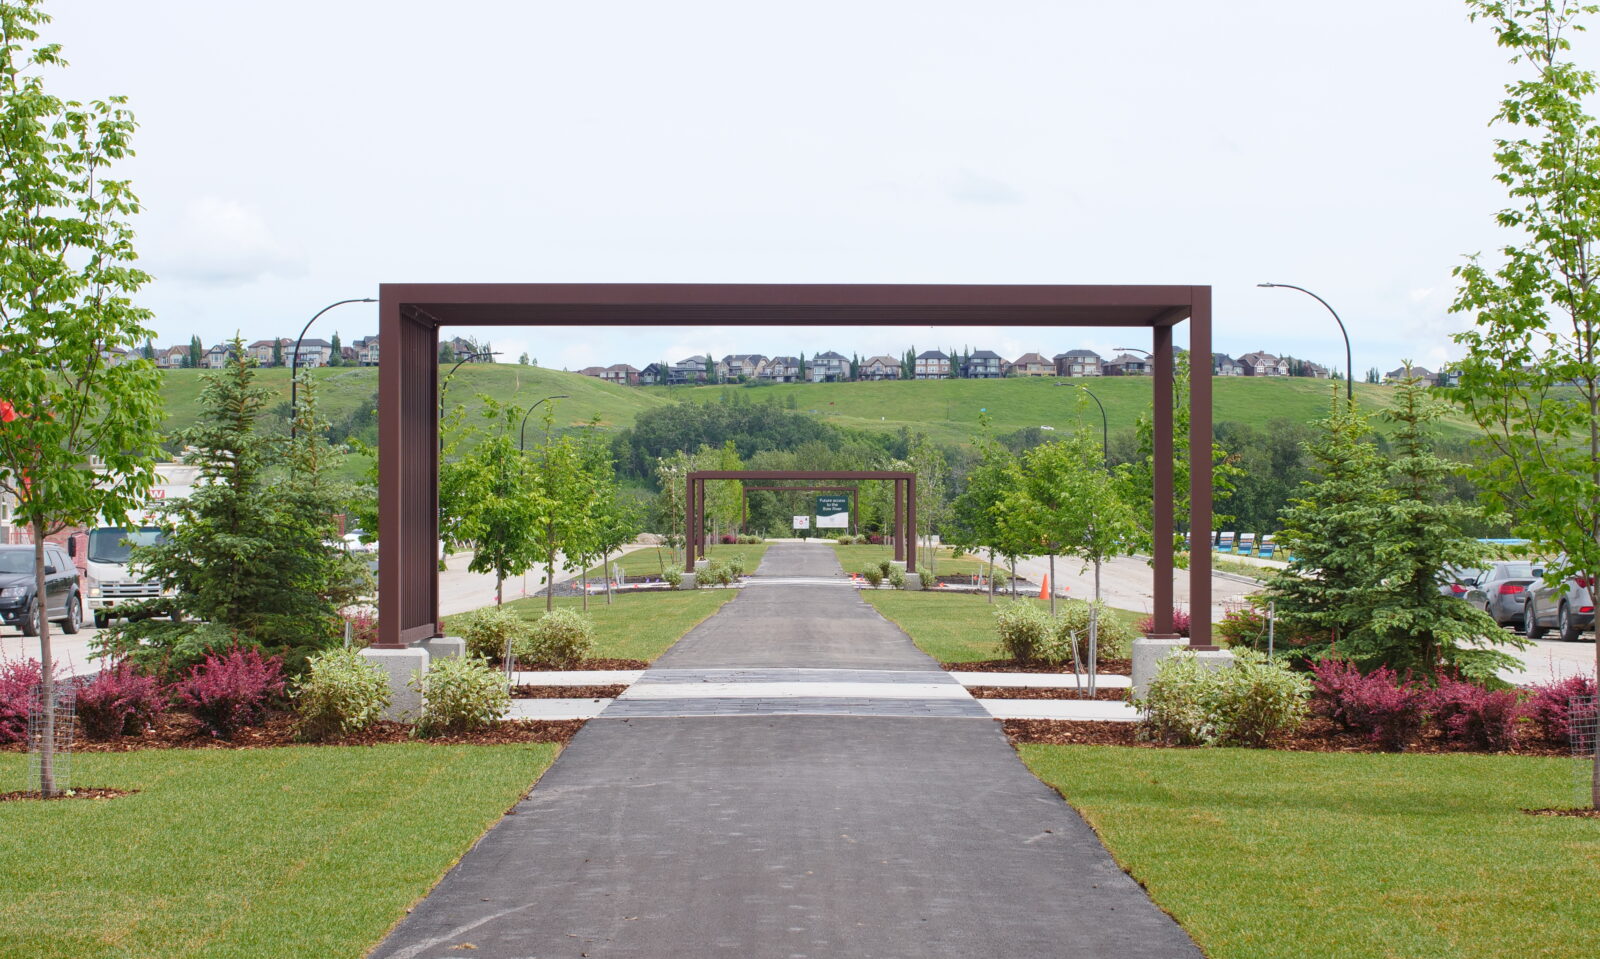 The Promenade Park walkway with metal arches.